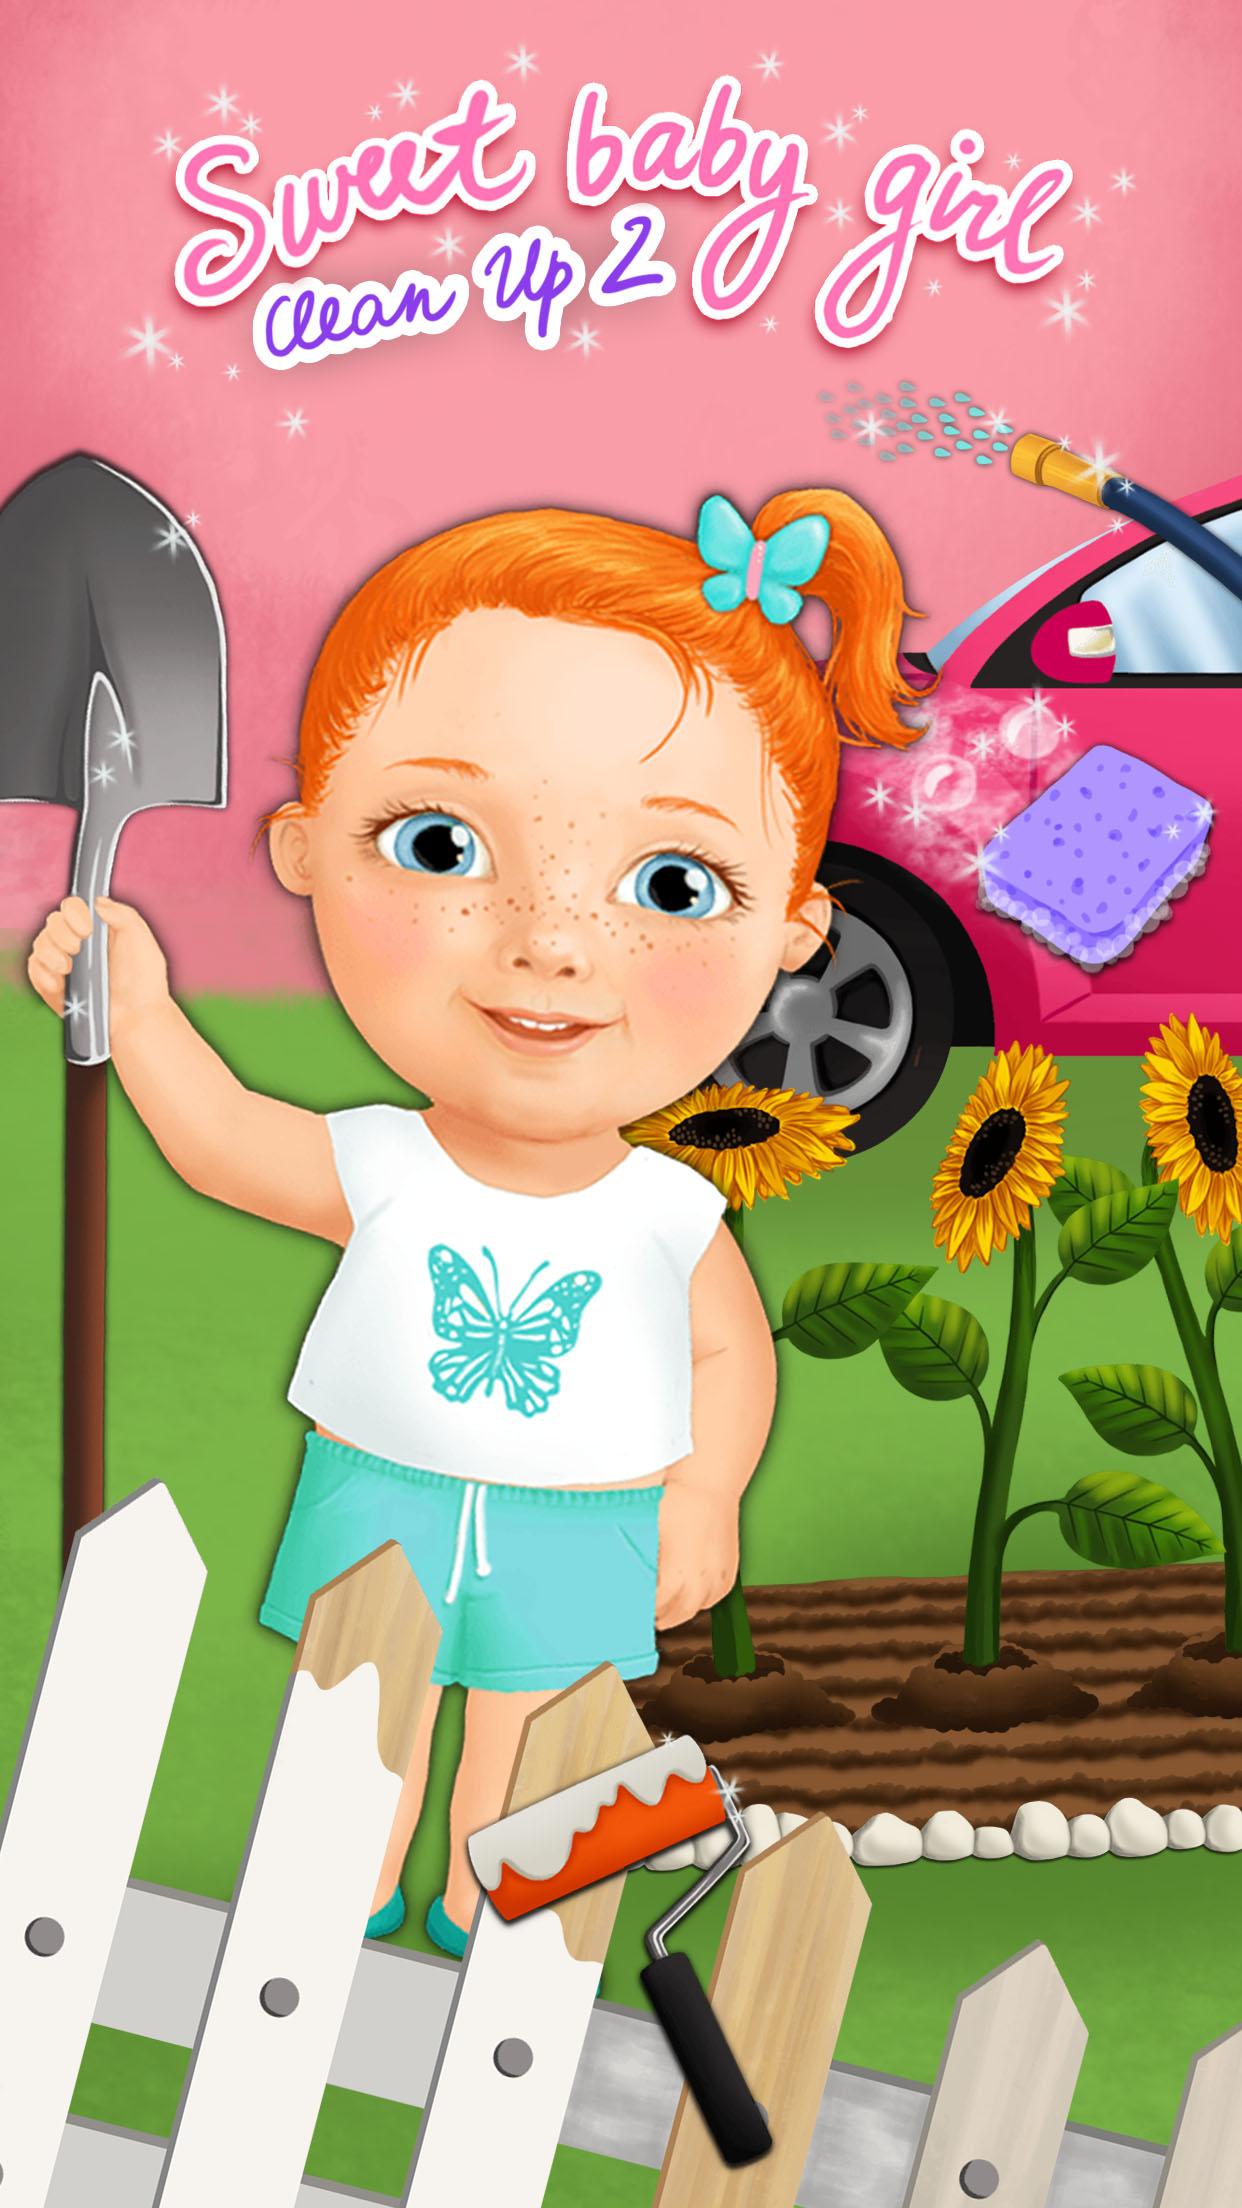 Android application Sweet Baby Girl - Clean Up 2 screenshort